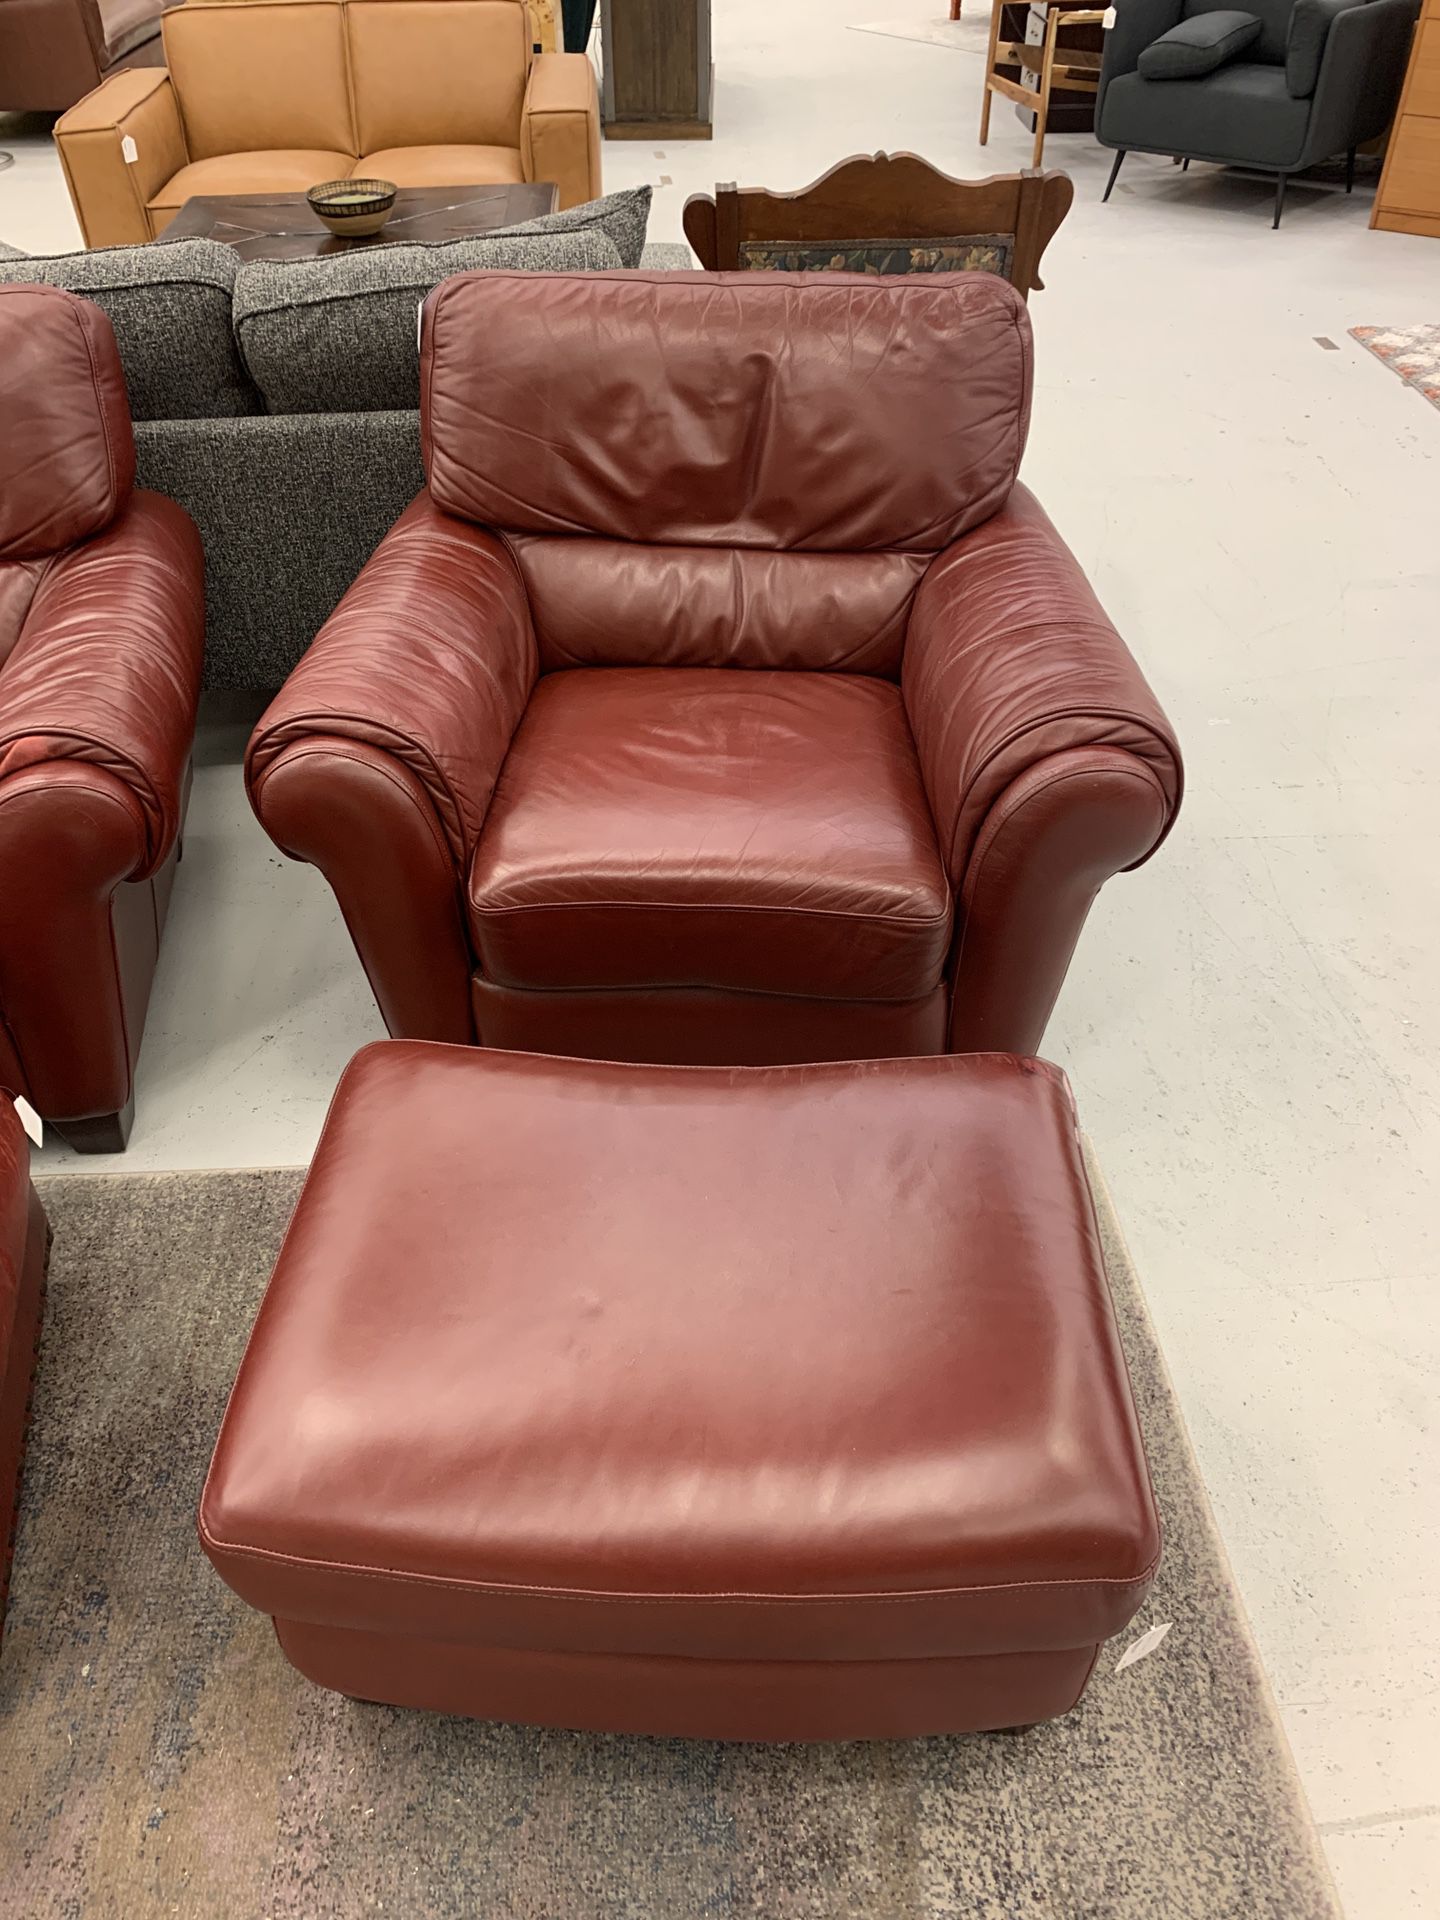 Maroon Leather Chair 5a 